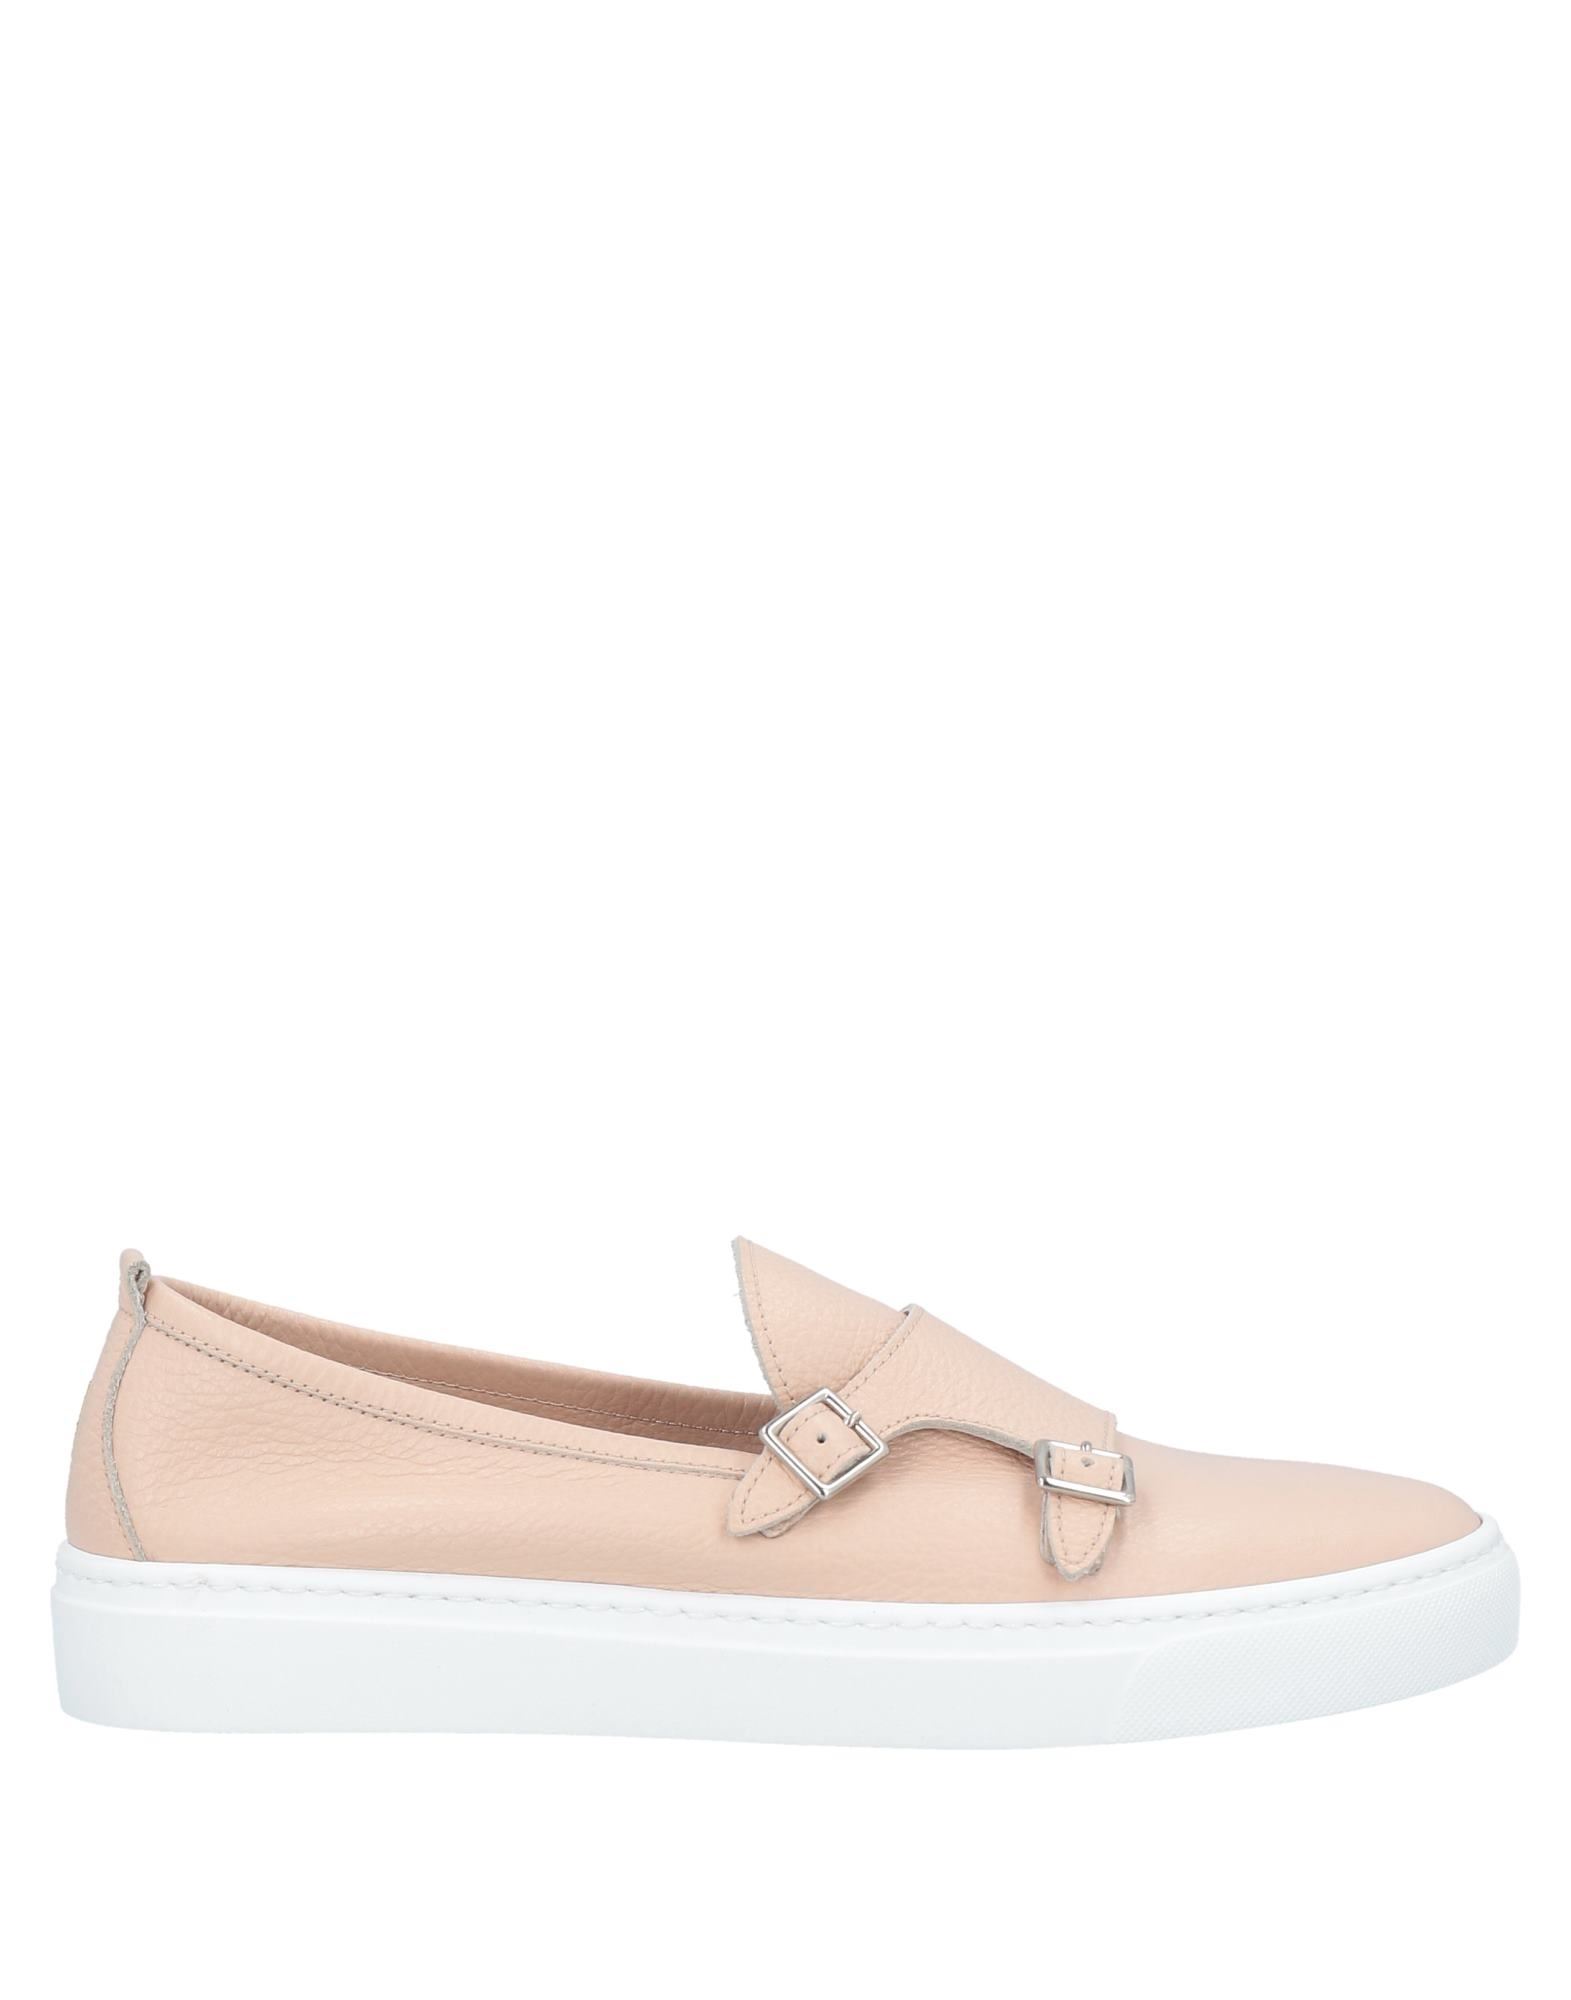 Henderson Baracco Loafers In Pale Pink